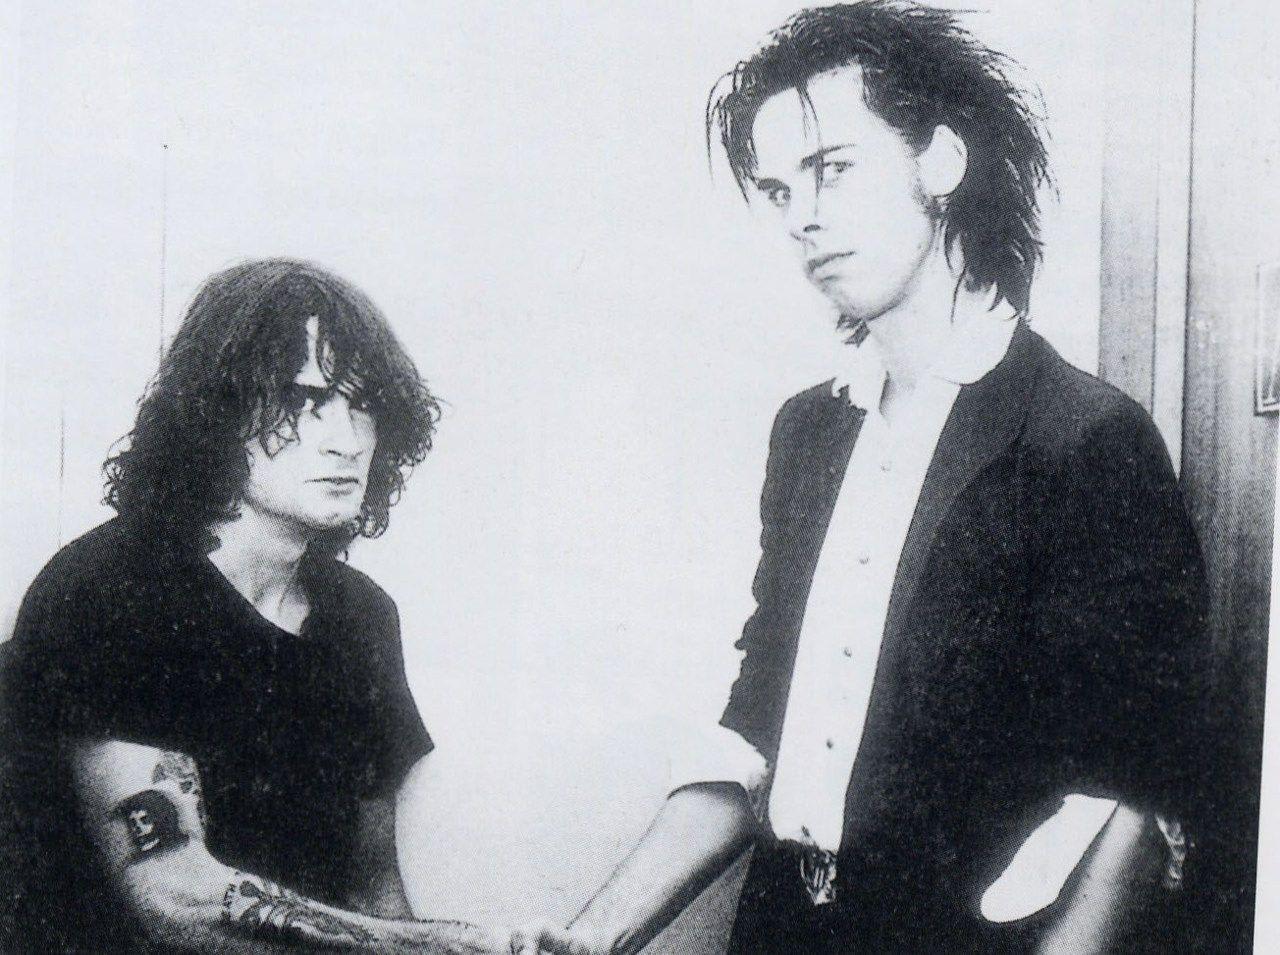 Henry Rollins and Nick Cave (1984)